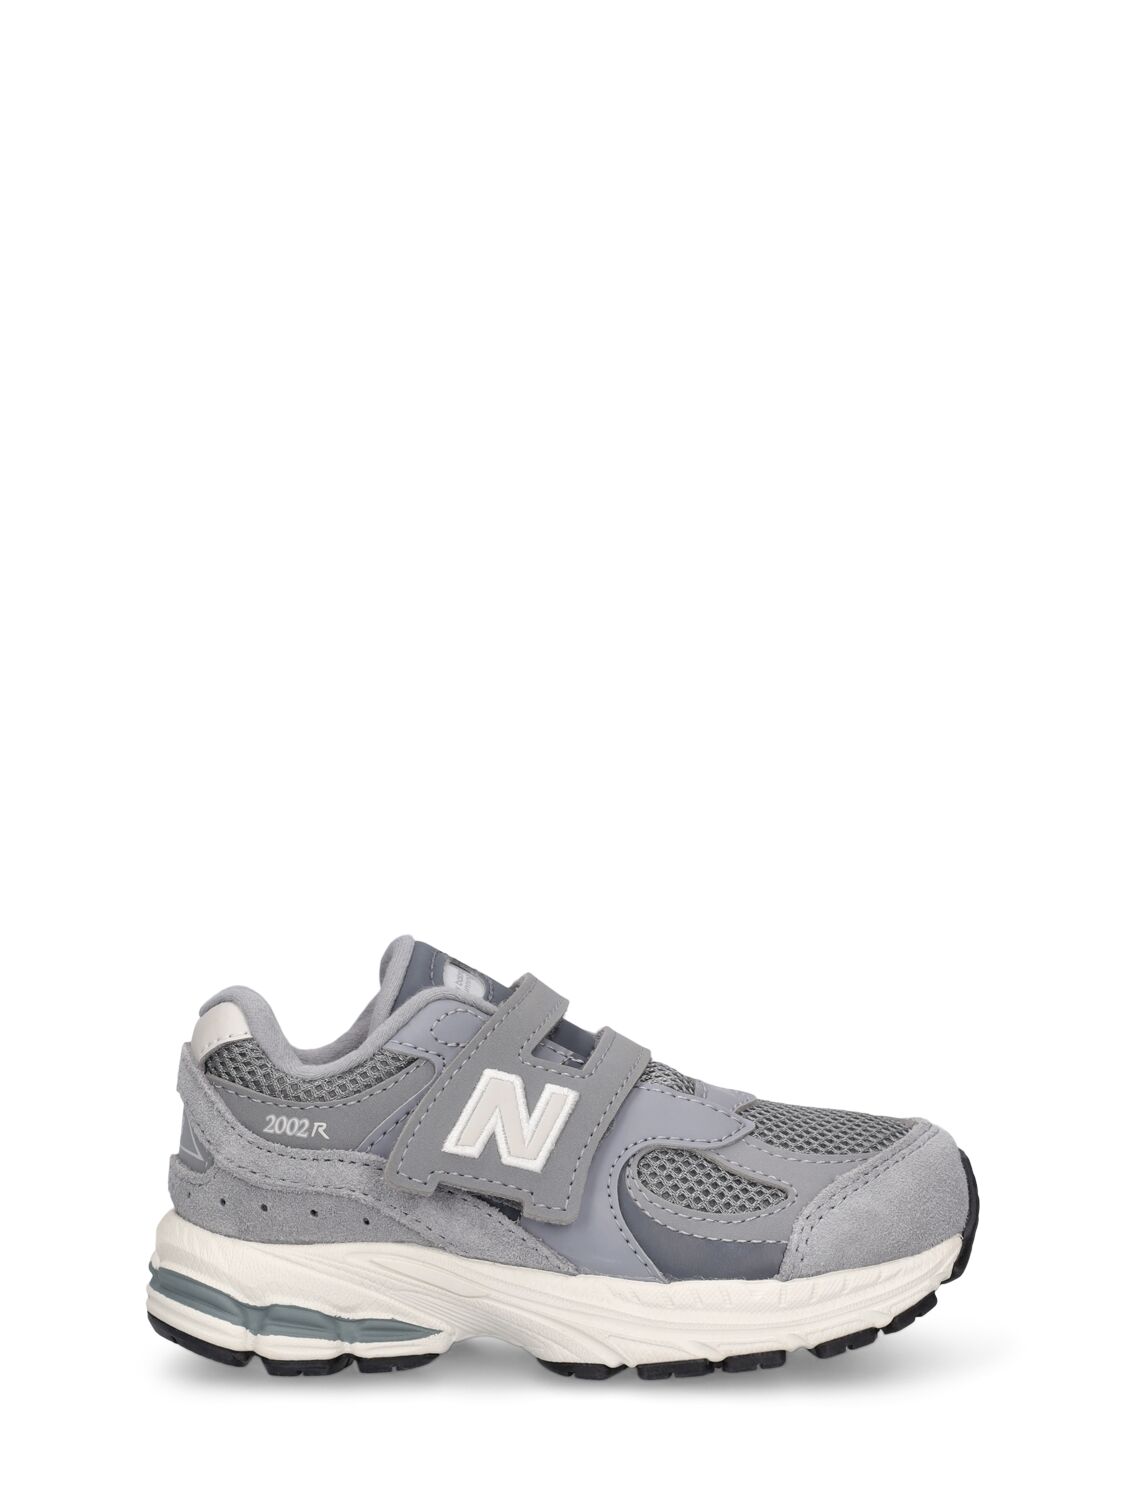 NEW BALANCE 2002 LEATHER SNEAKERS